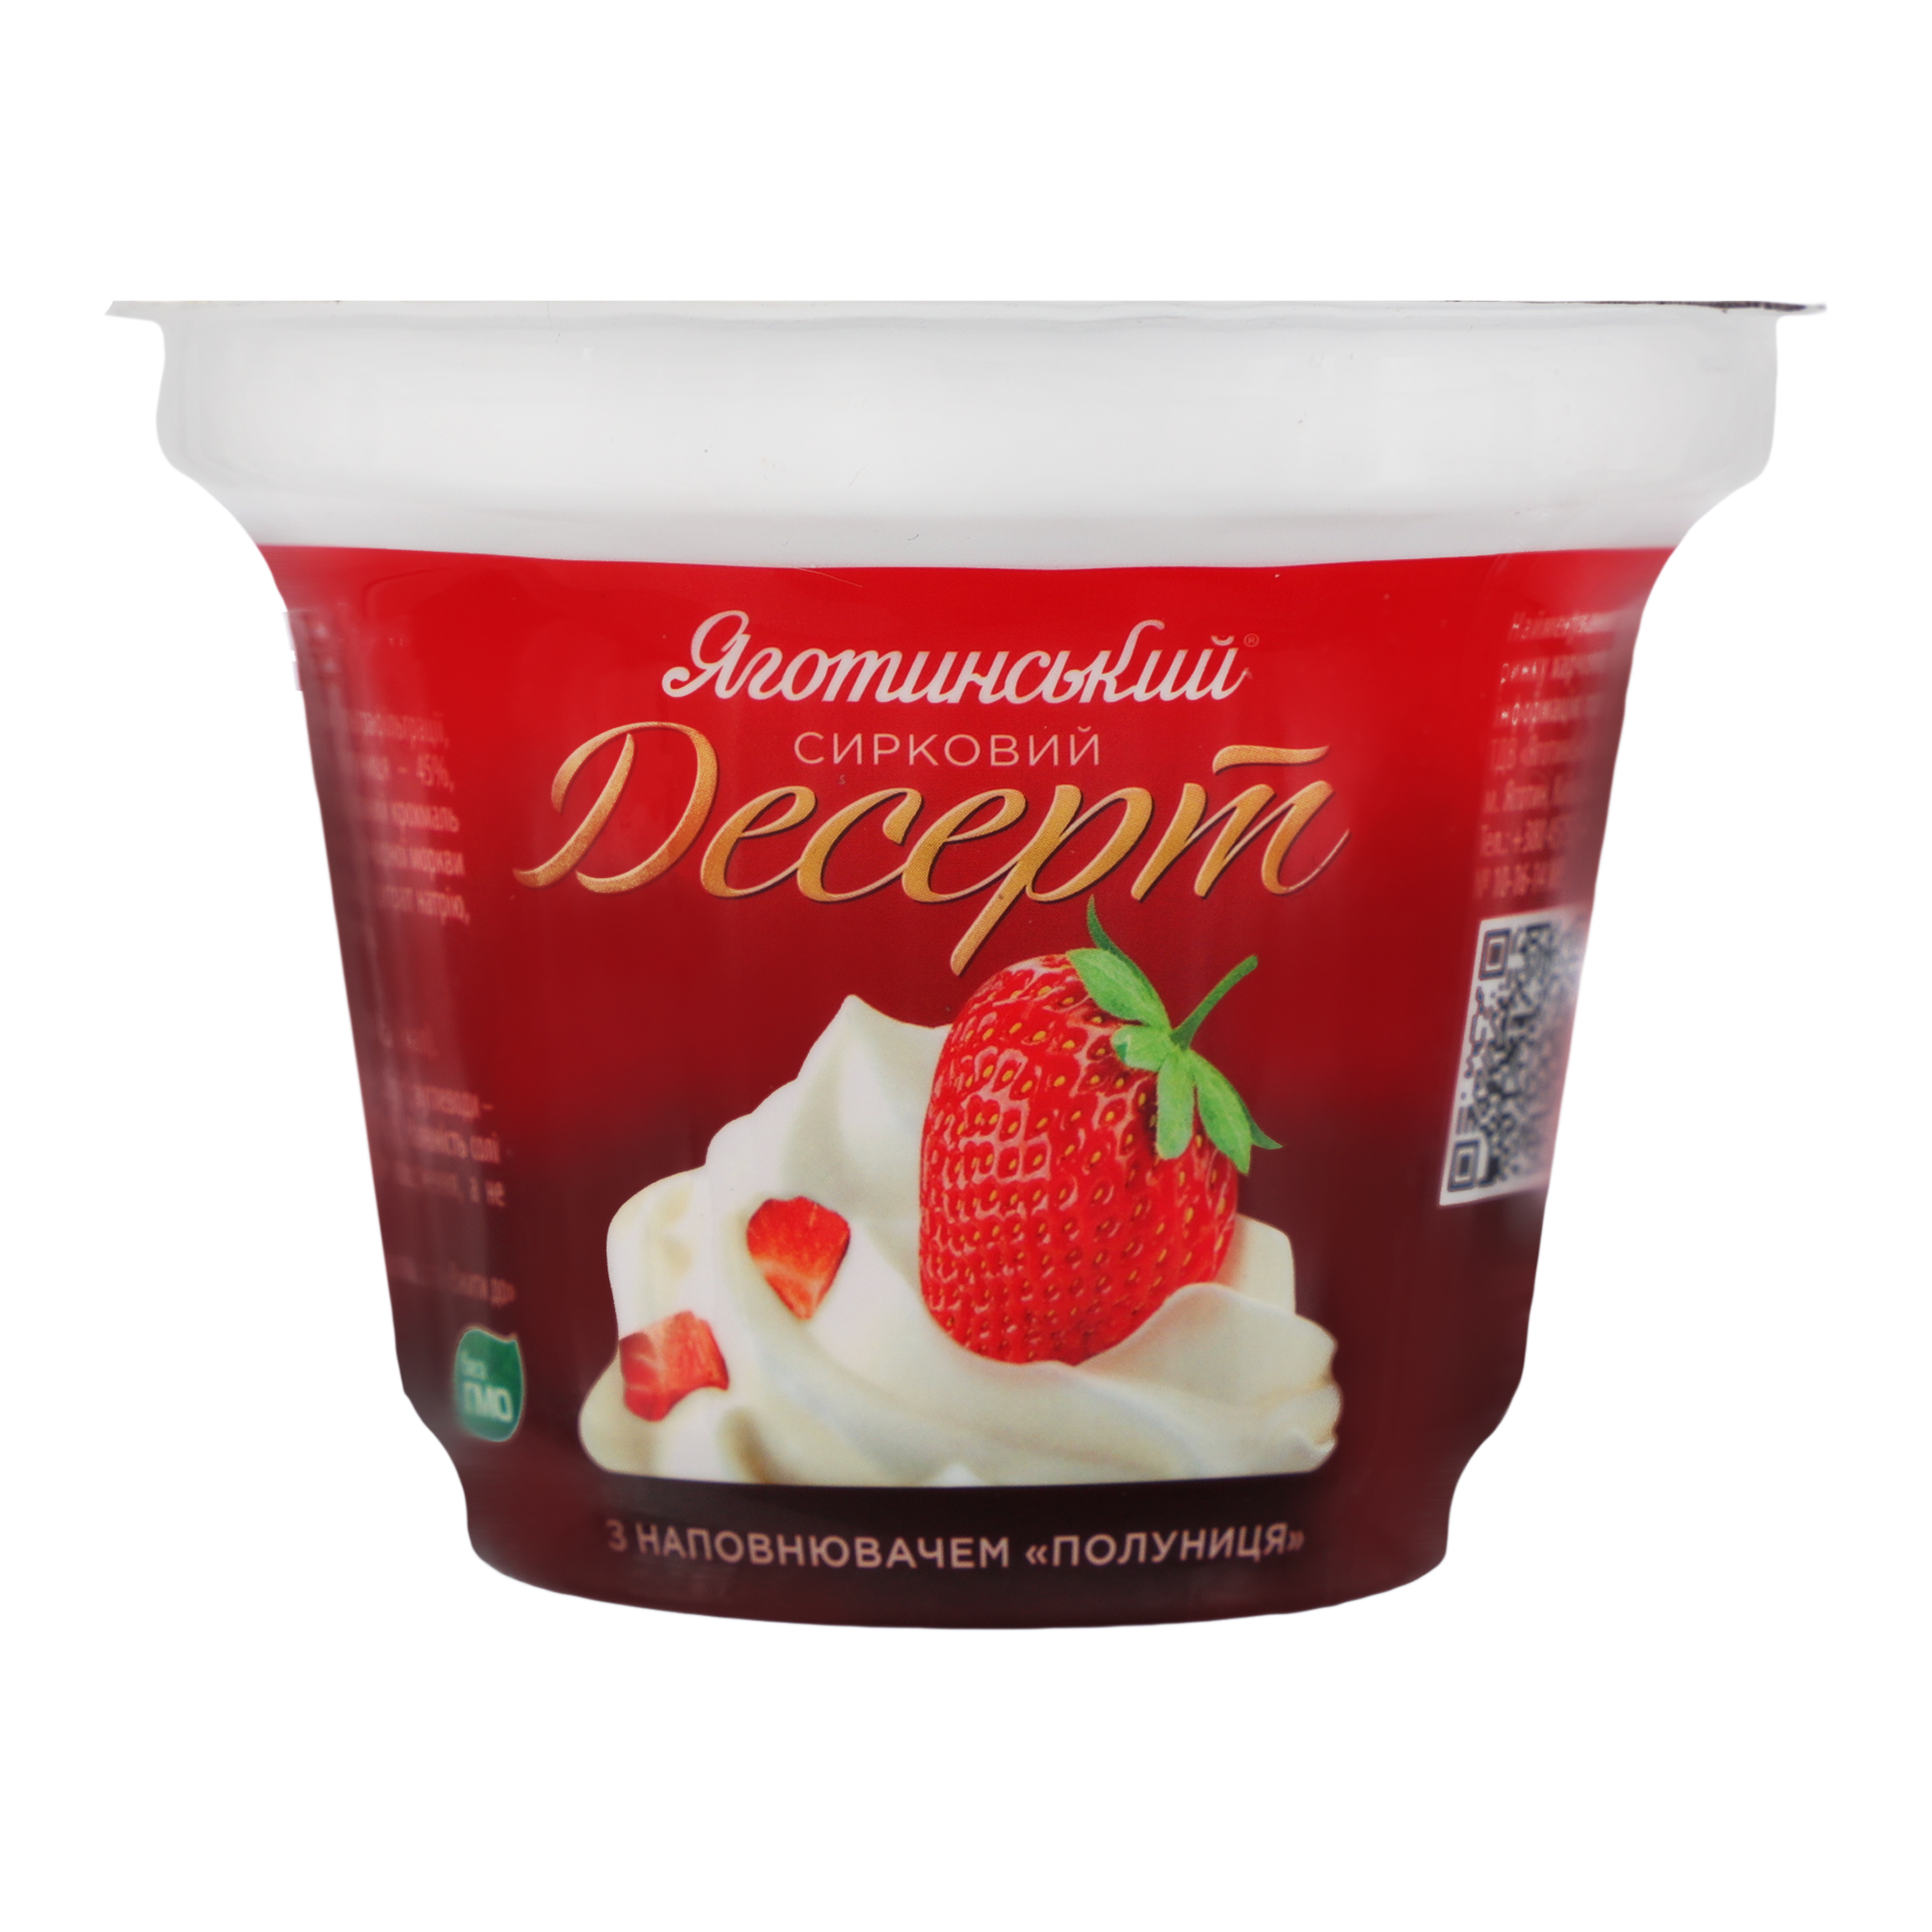 Cottage cheese dessert Yagotynsky with strawberry filling 4,2% cup 180g